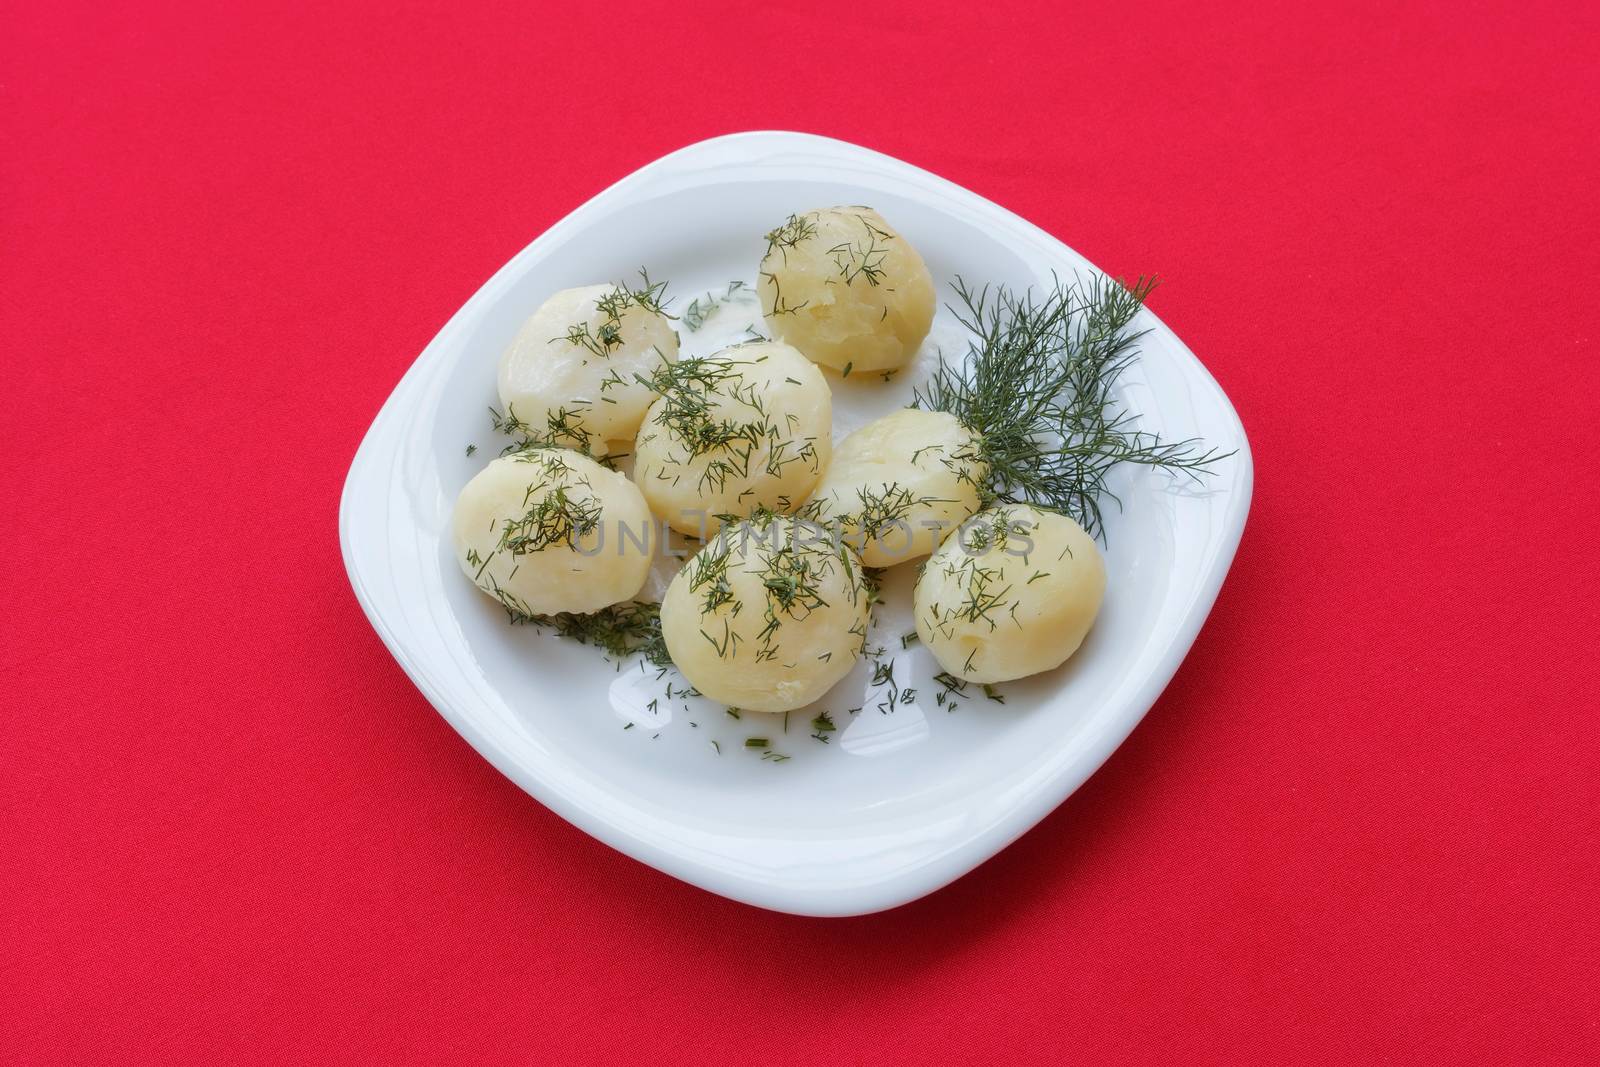 Boiled potatoes with herbs on a plate and red tablecloth. Close-up view from above.